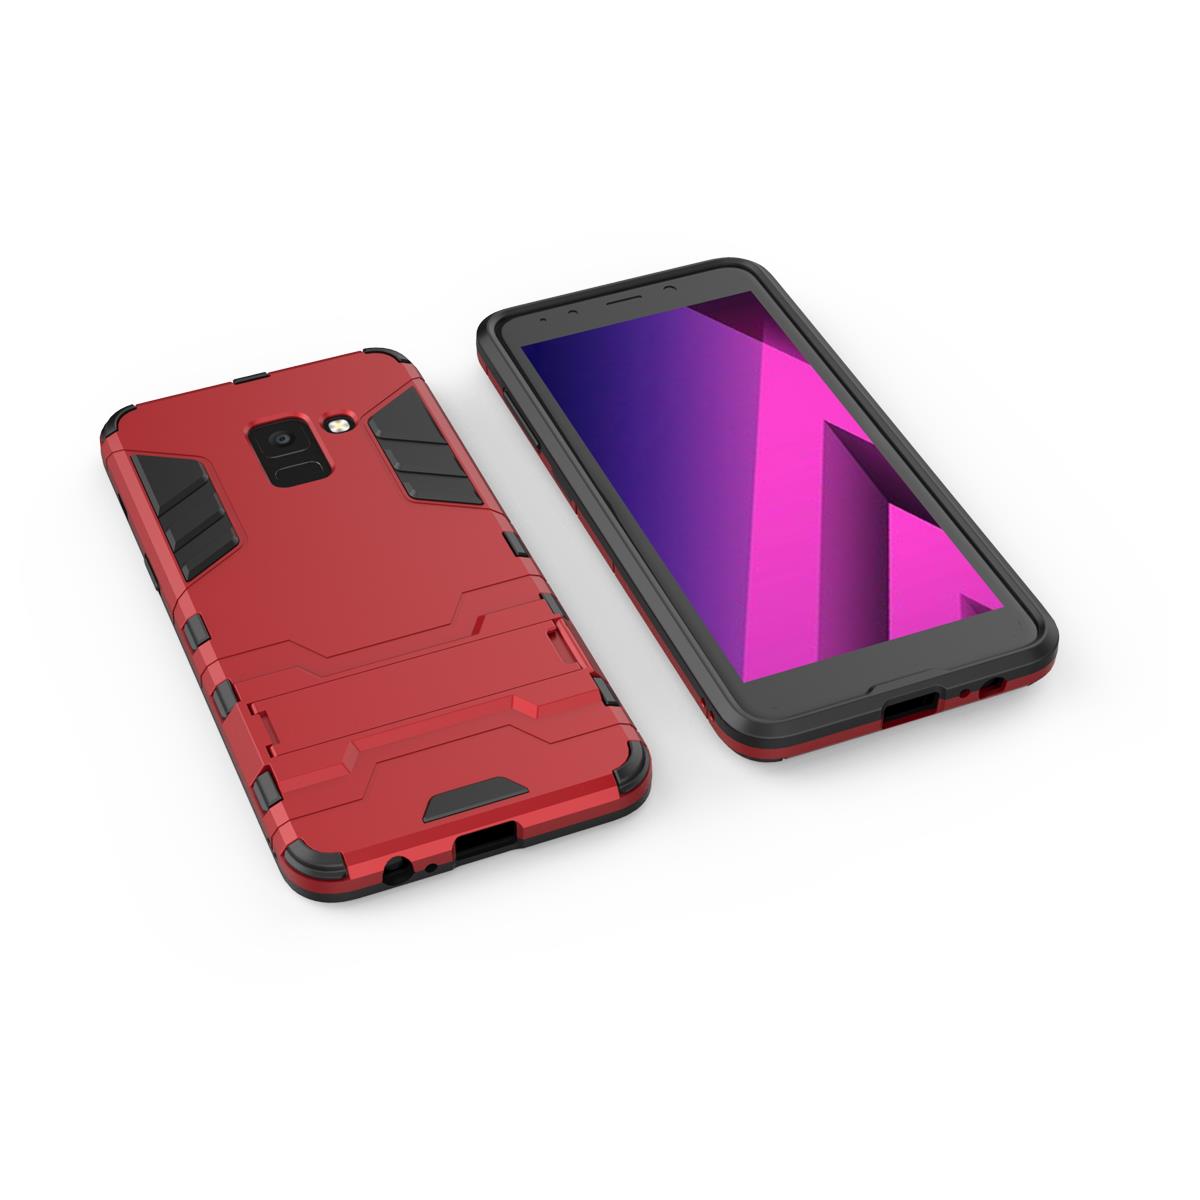 Bakeey-2-in-1-Armor-Kickstand-Hard-PC-Protective-Case-for-Samsung-Galaxy-A8-Plus-2018-1297009-5